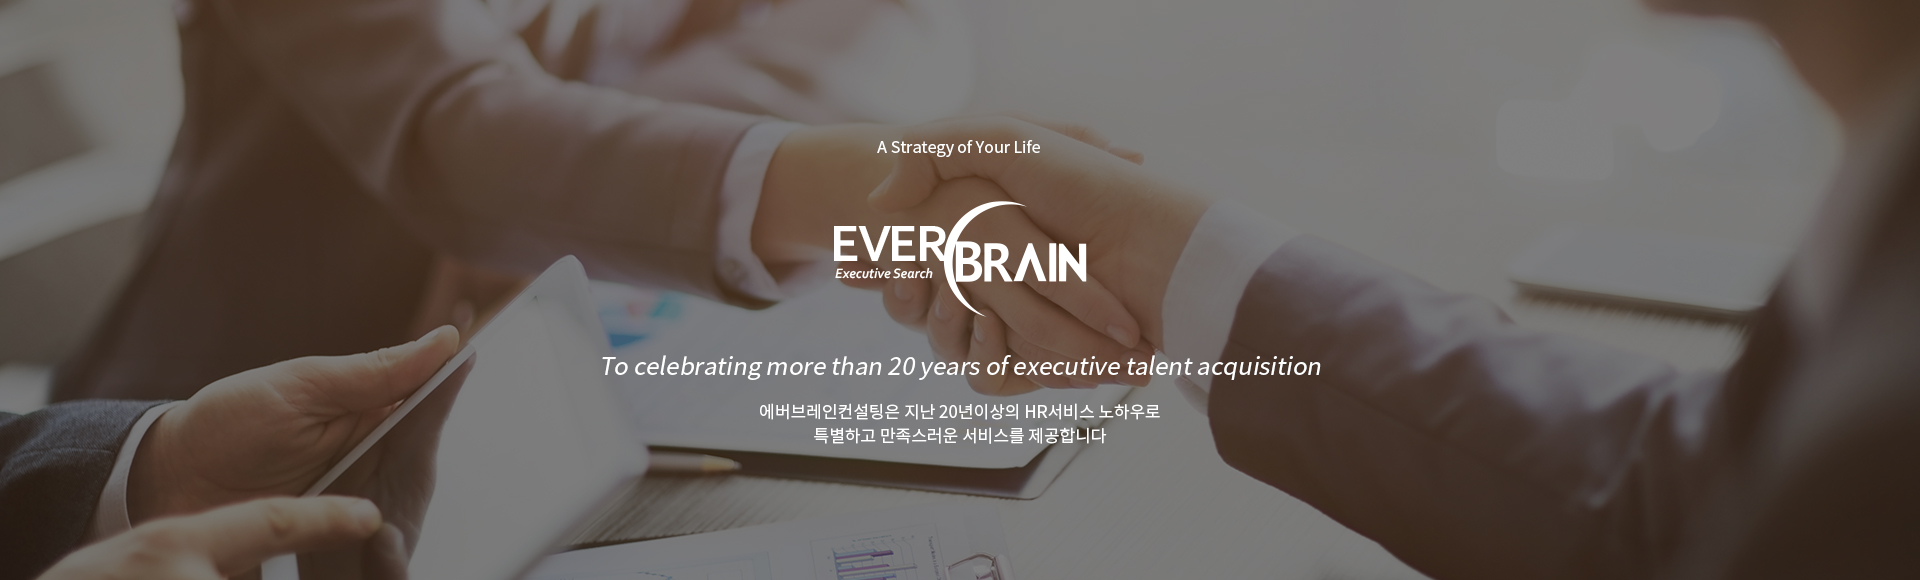 A Strategy of Your Life, EVERBRAIN. 에버브레인컨설팅은 지난 20년의 HR서비스 노하우로 특별하고 만족스러운 서비스를 제공합니다. To celebrating more than 20 years of executive talent acquisition with clients.